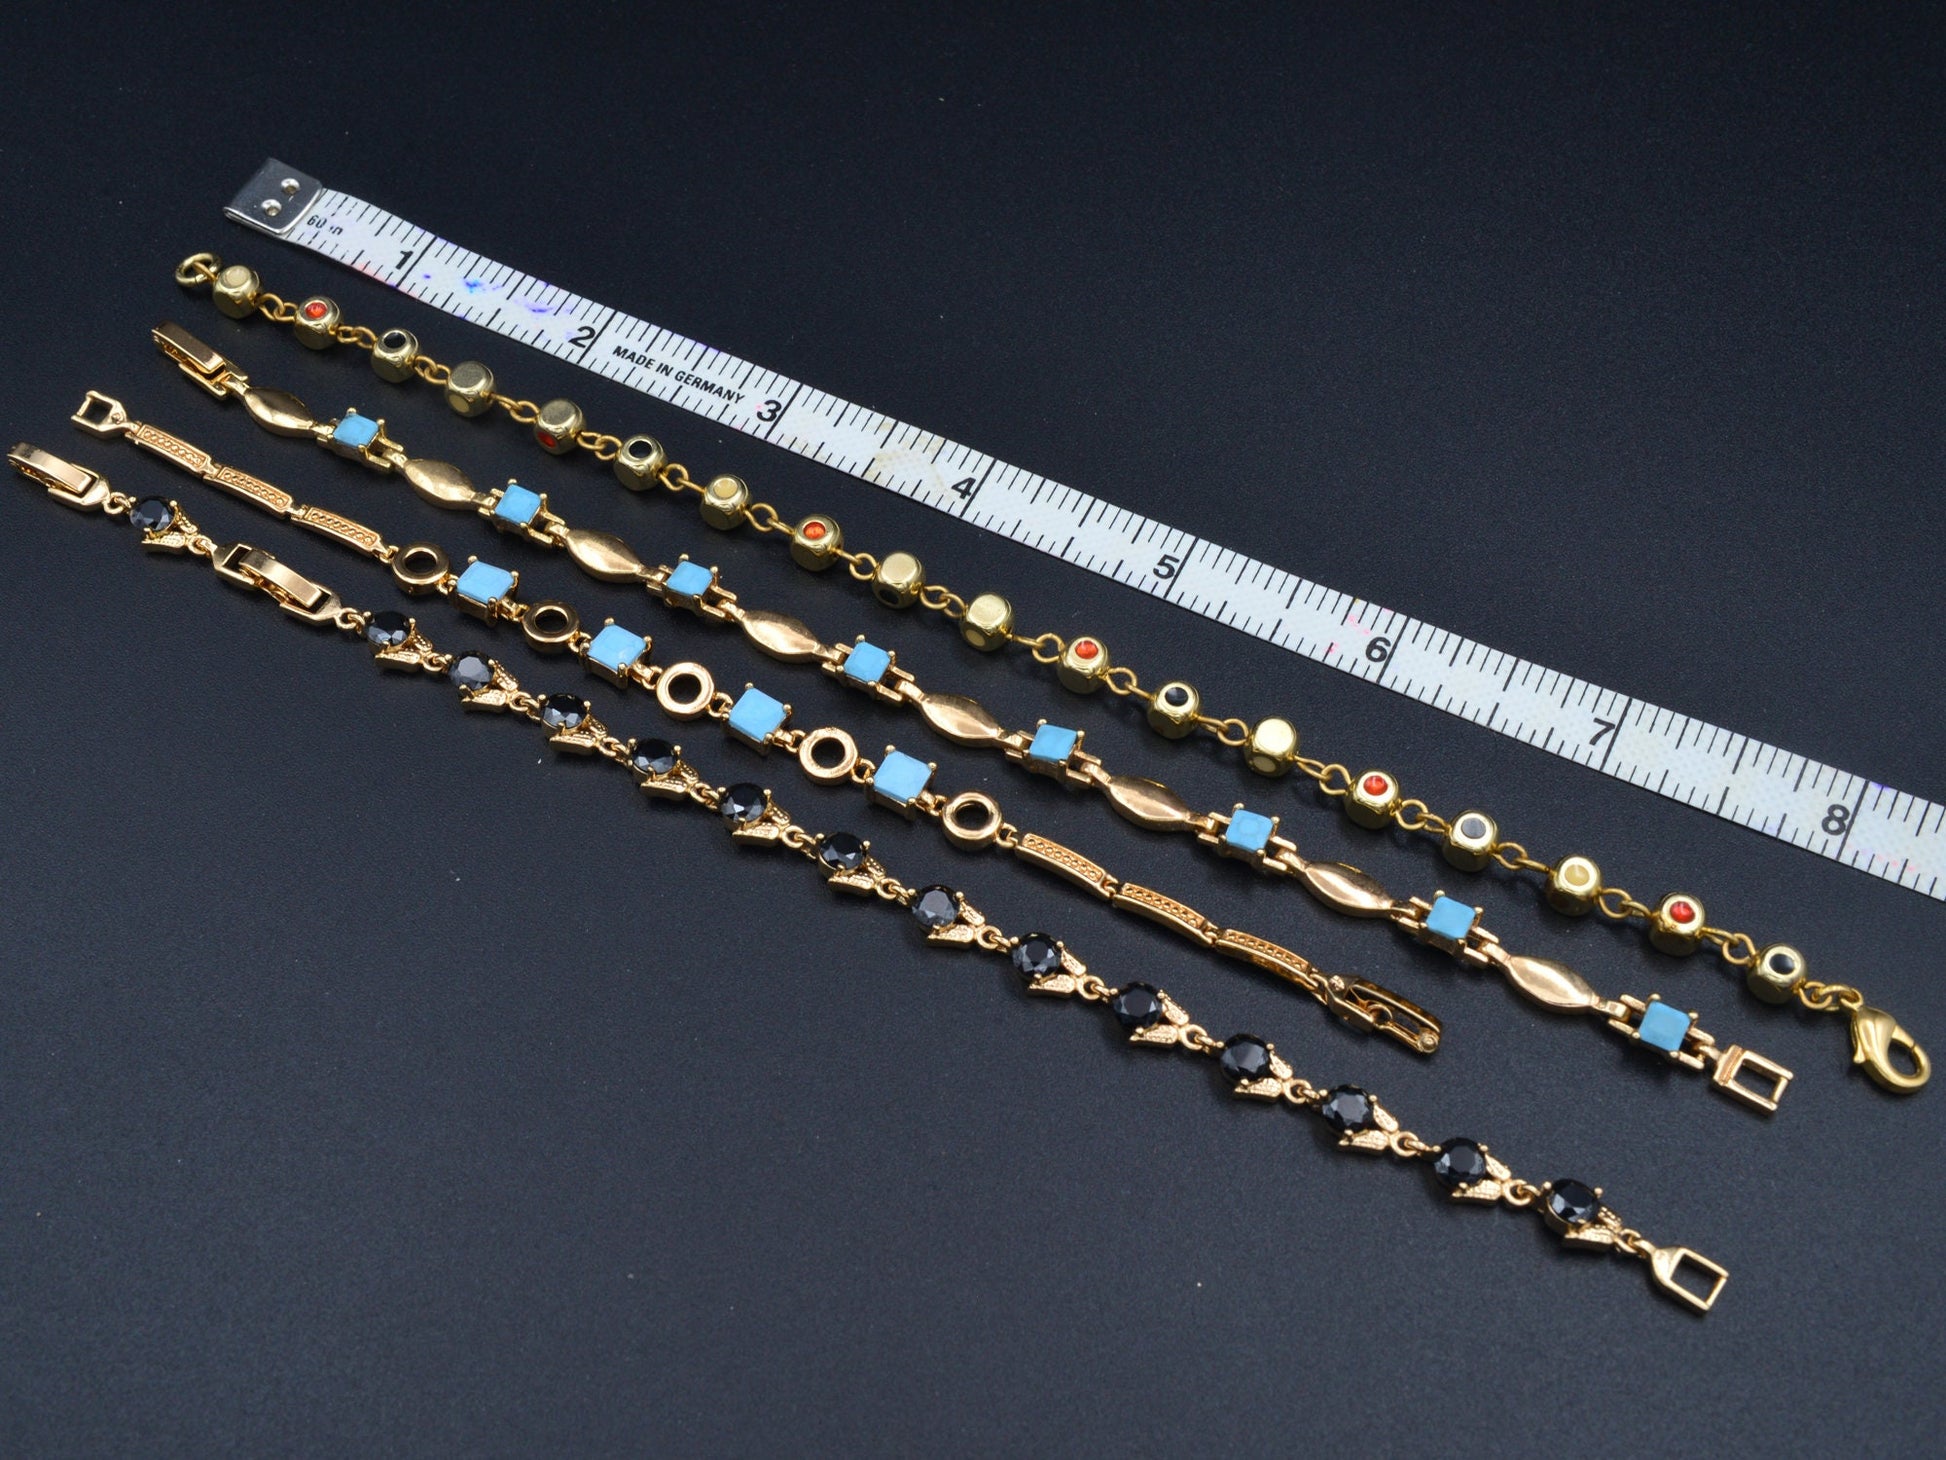 Women's Gold Bracelet Chain With Black Cubic Zirconia bohemian / Turquoise Bling for Jewelry Making tarnish resistant